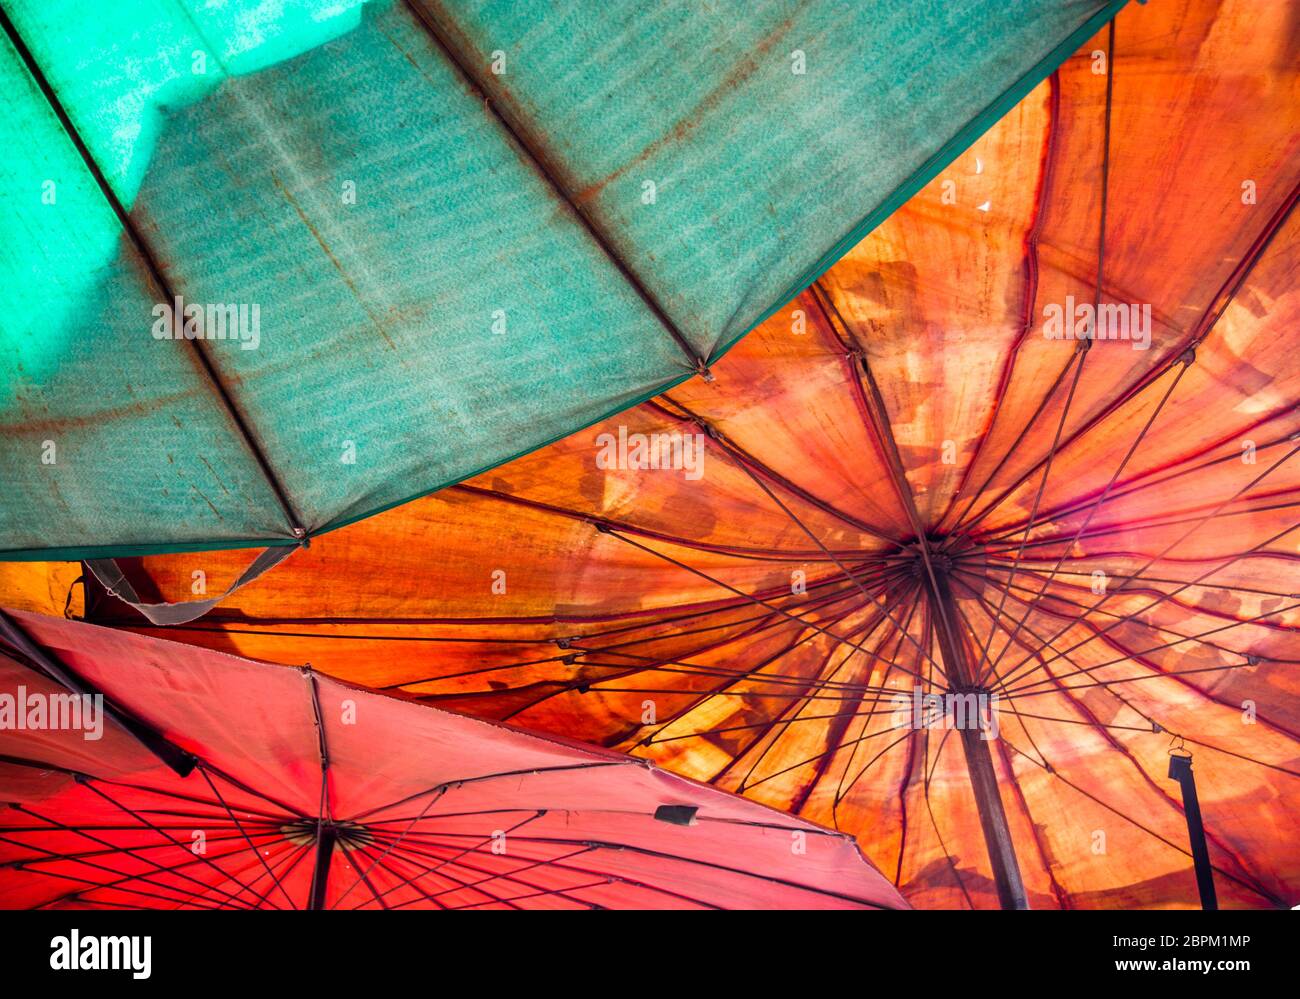 Colorful asian parasols in the street market Stock Photo